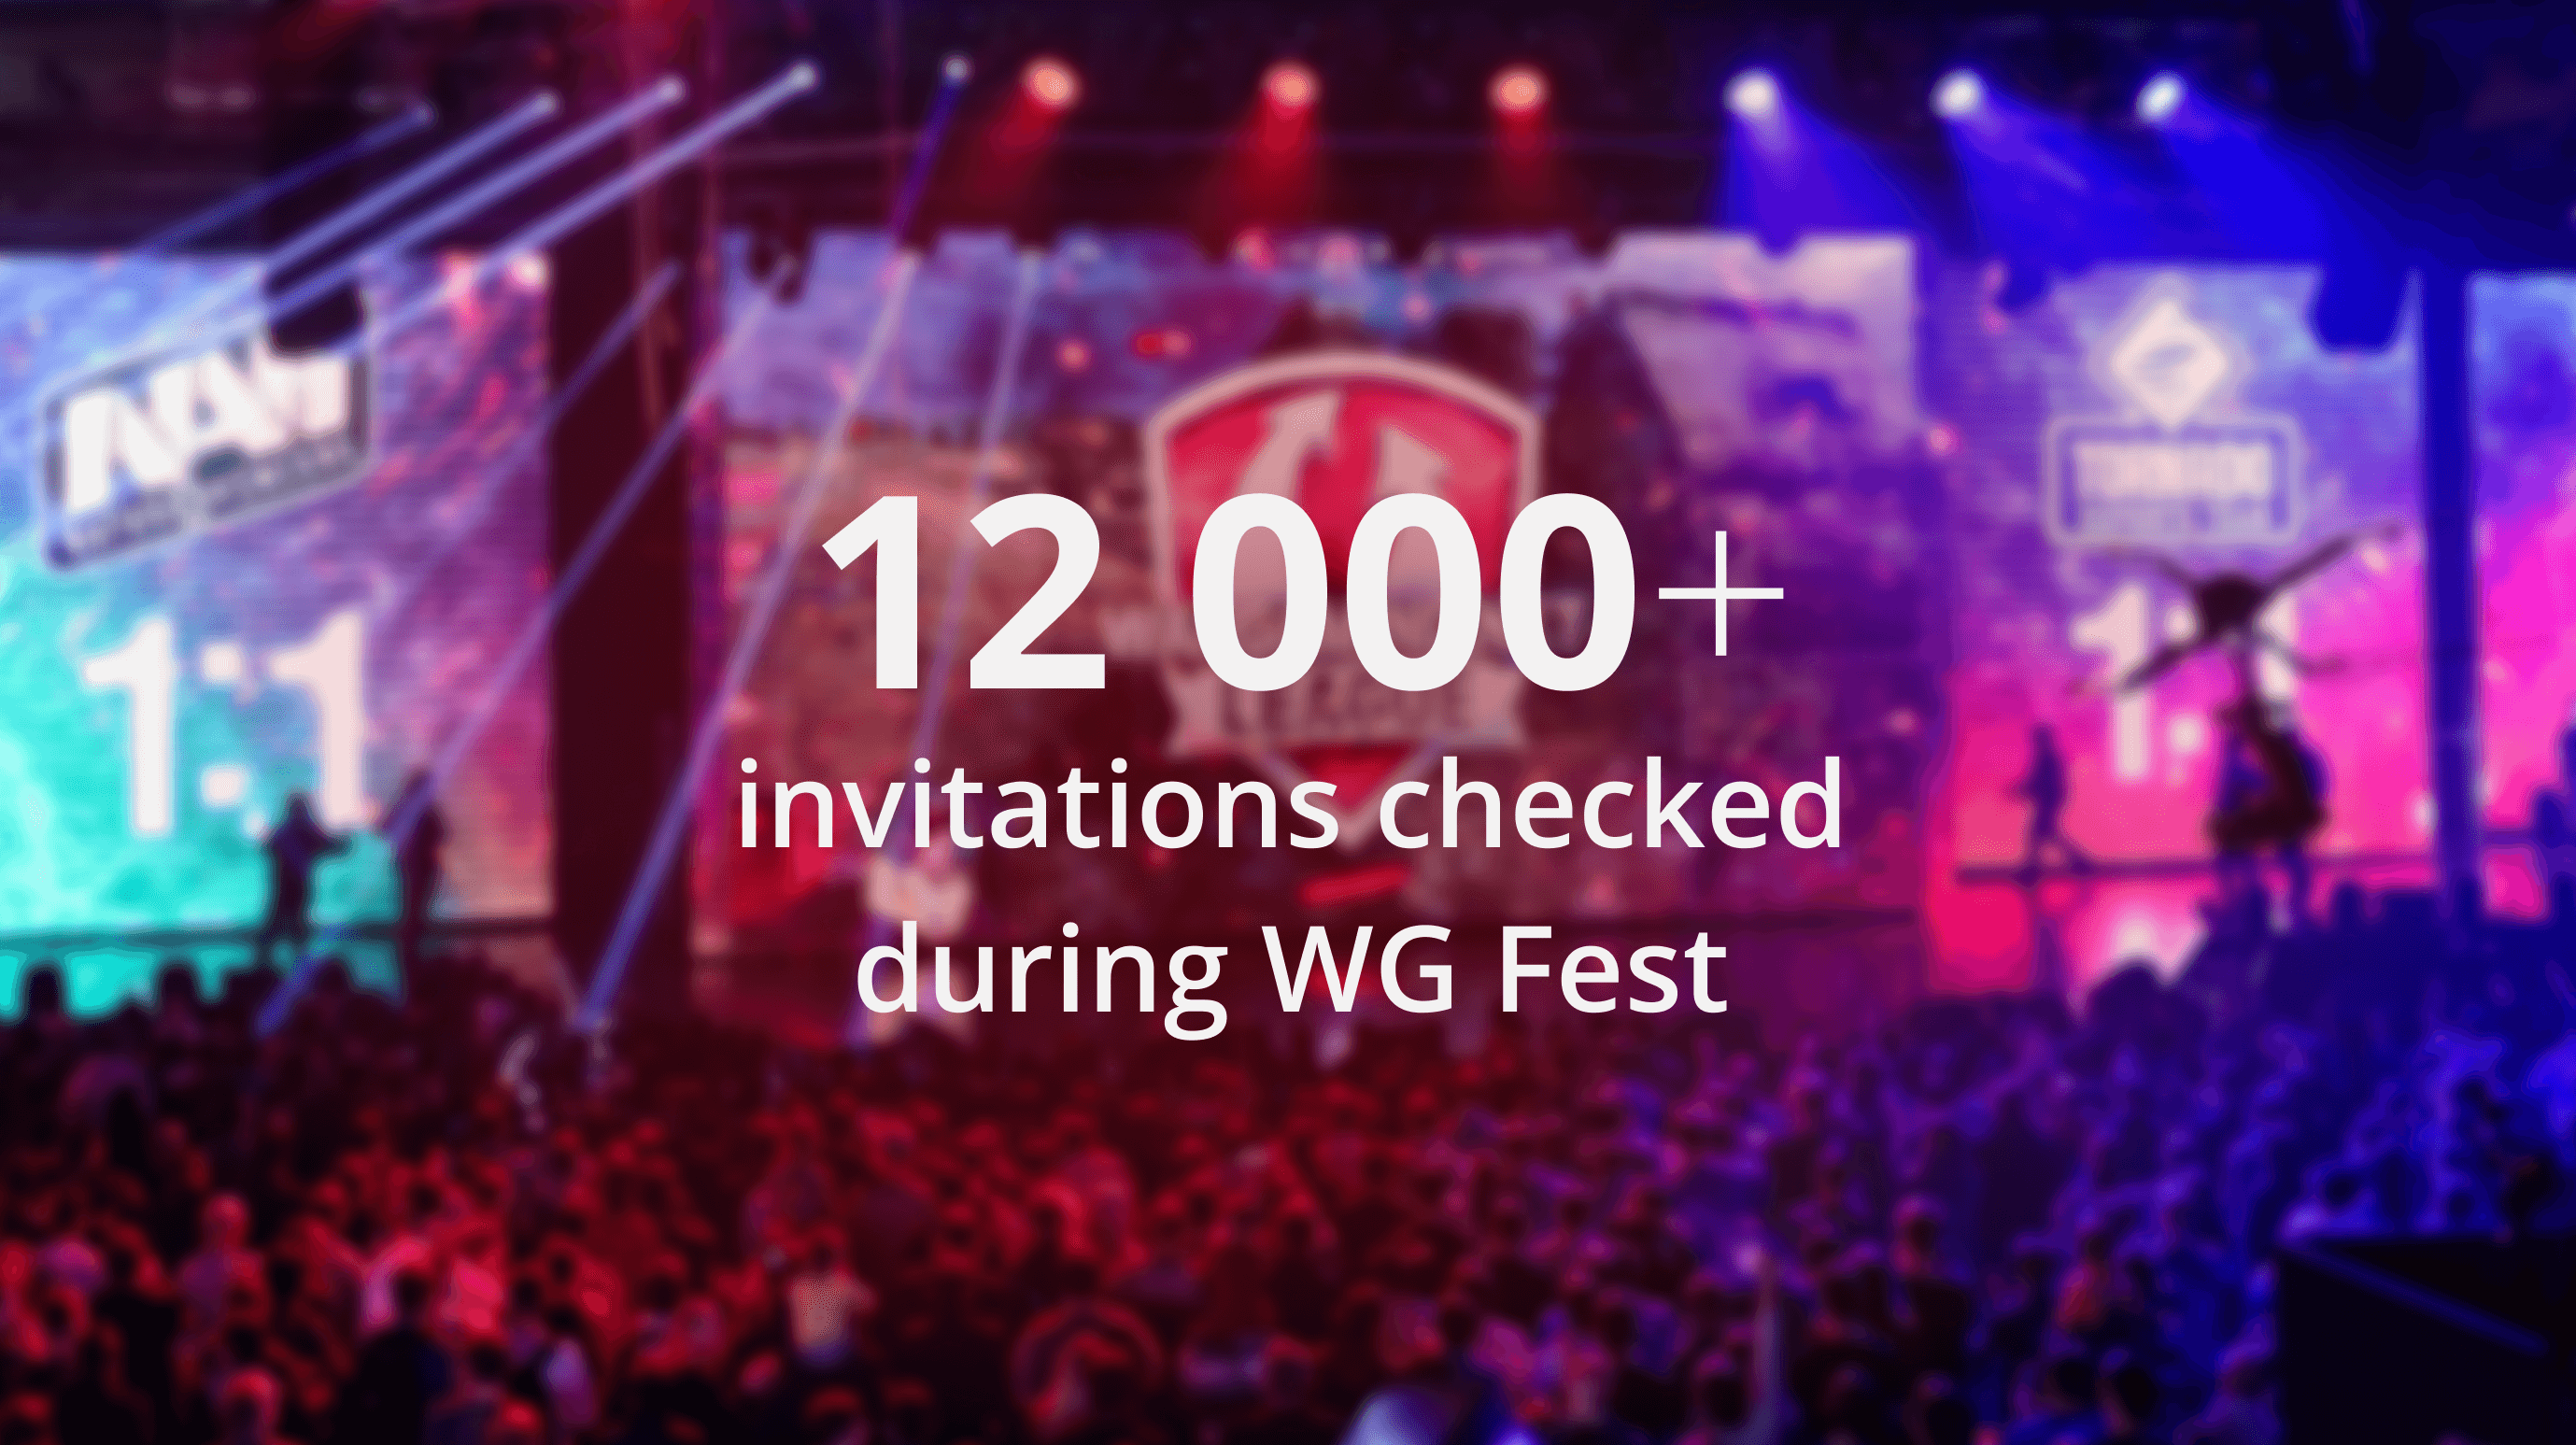 12 000+ invitations checked in WG Fest with WG scanner